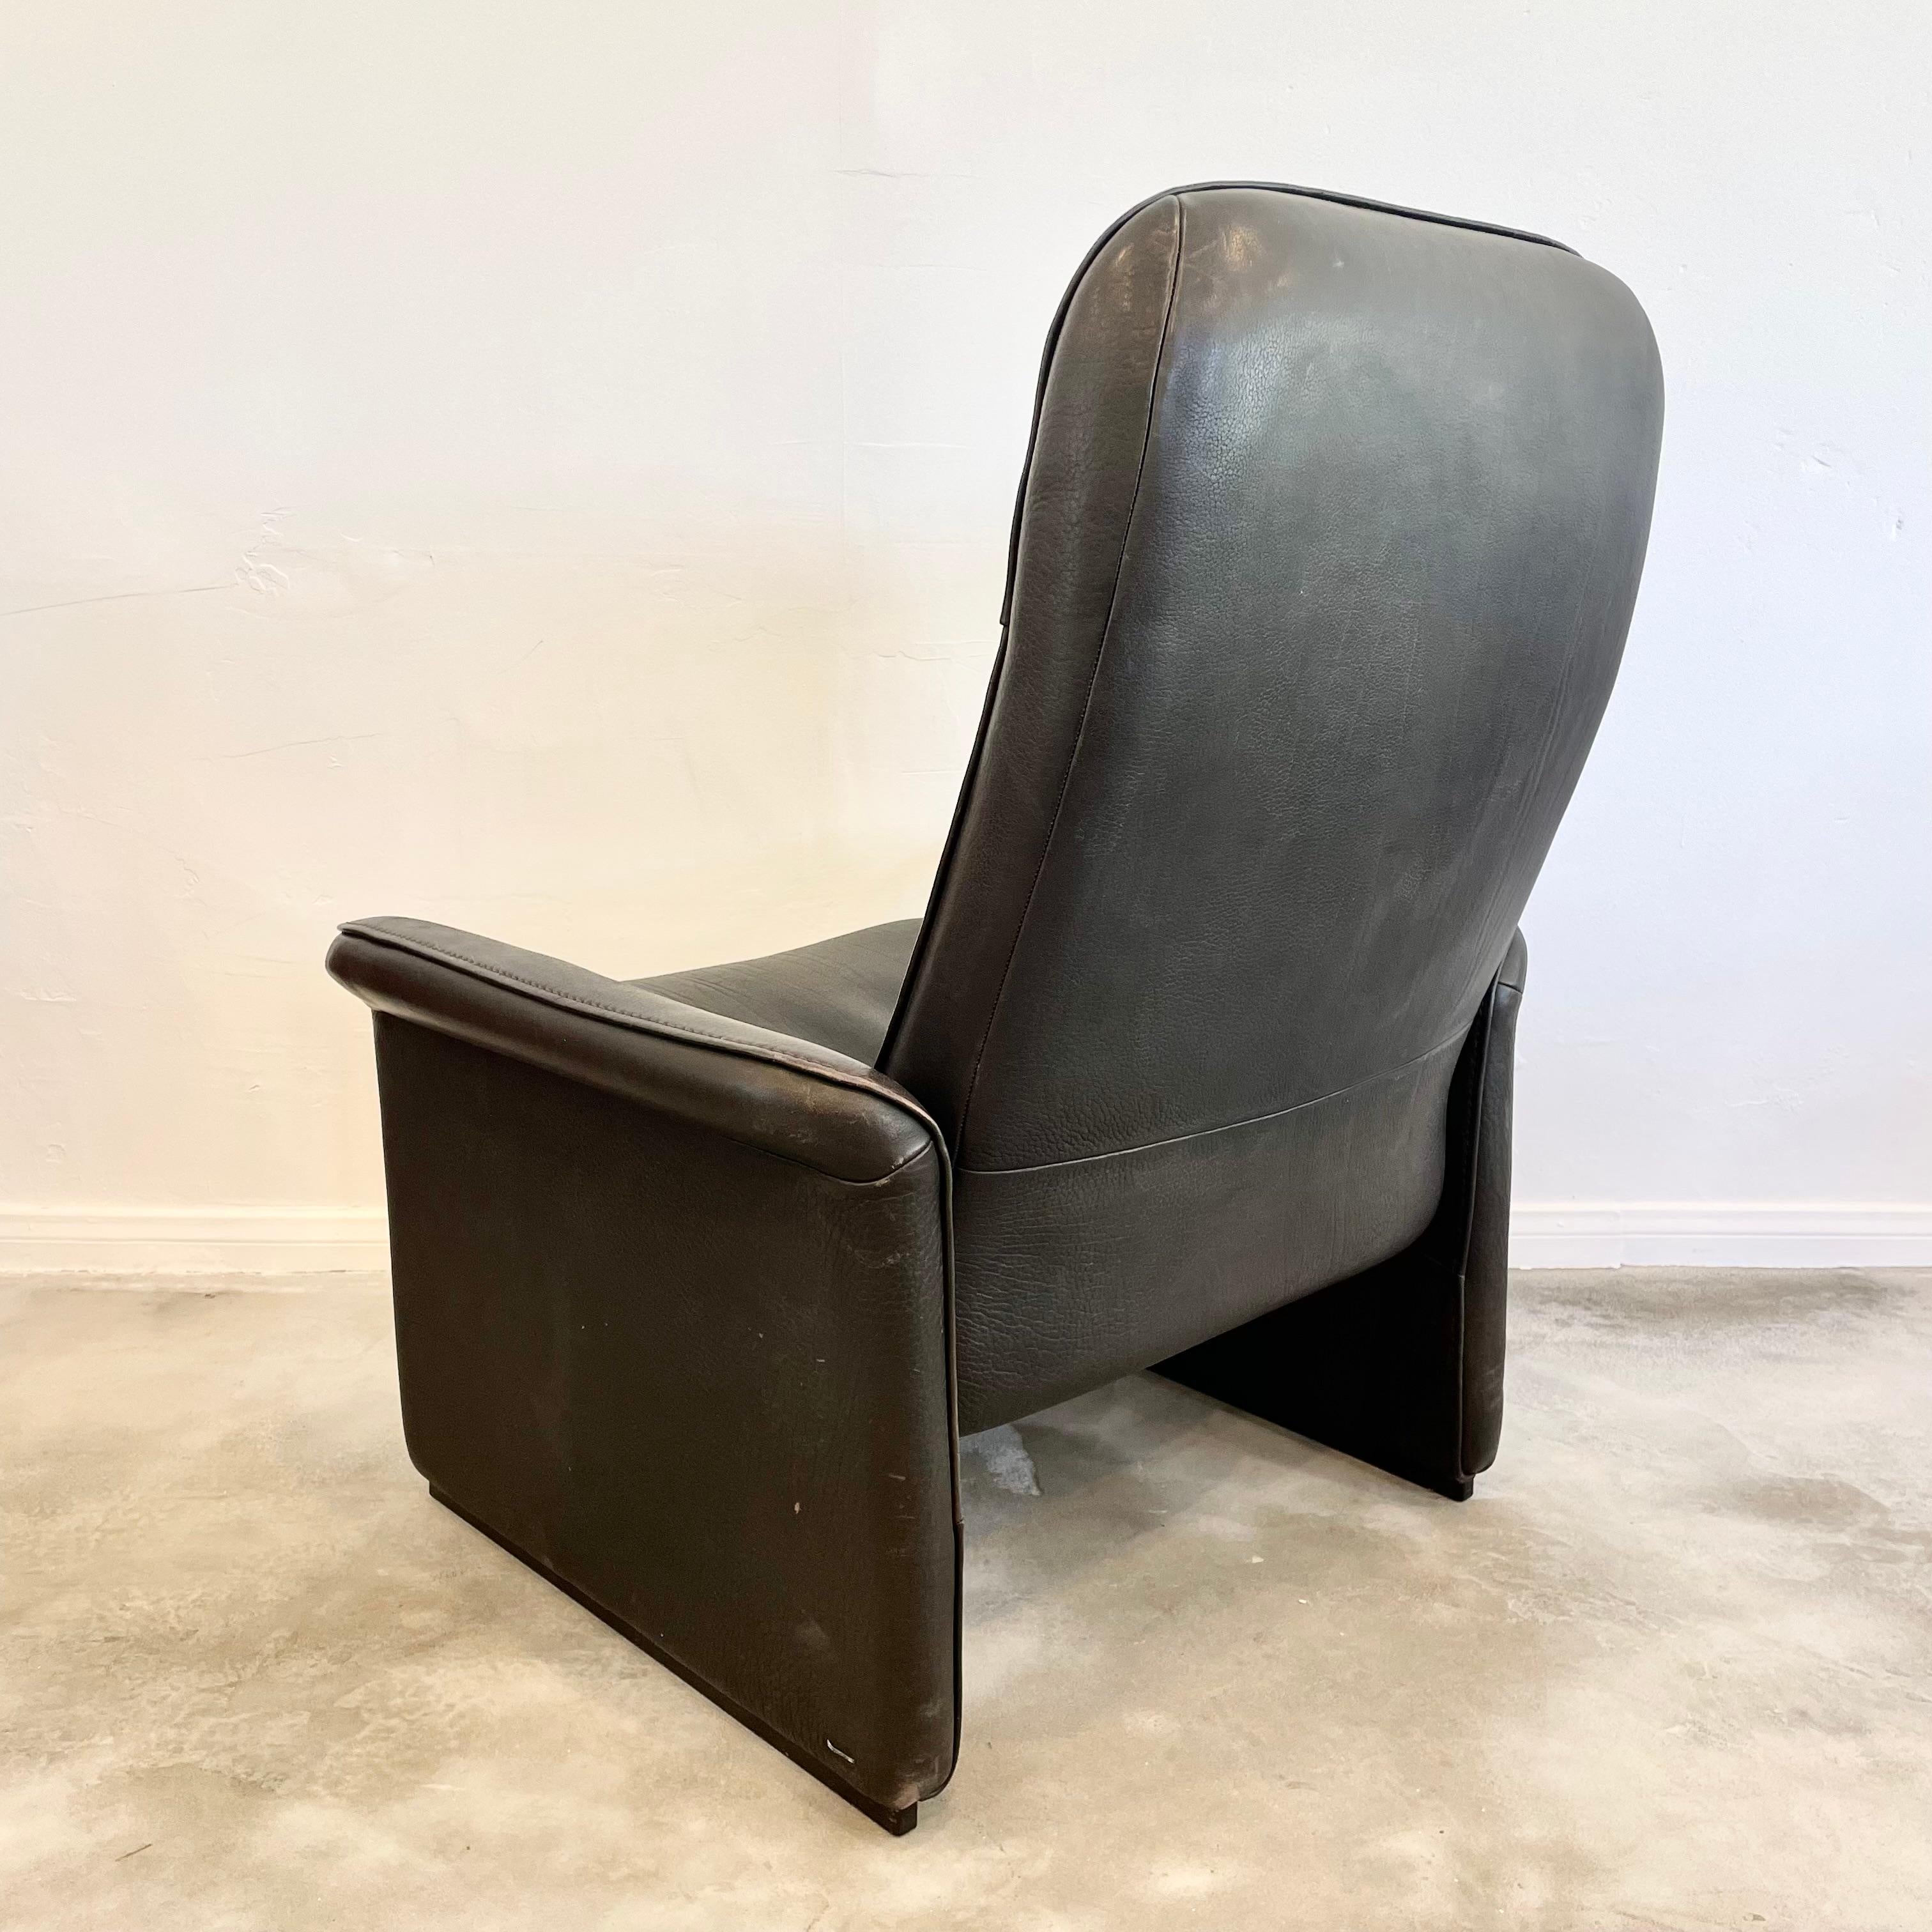 Late 20th Century De Sede DS-50 Black Leather Recliner Chair, 1970s Switzerland For Sale